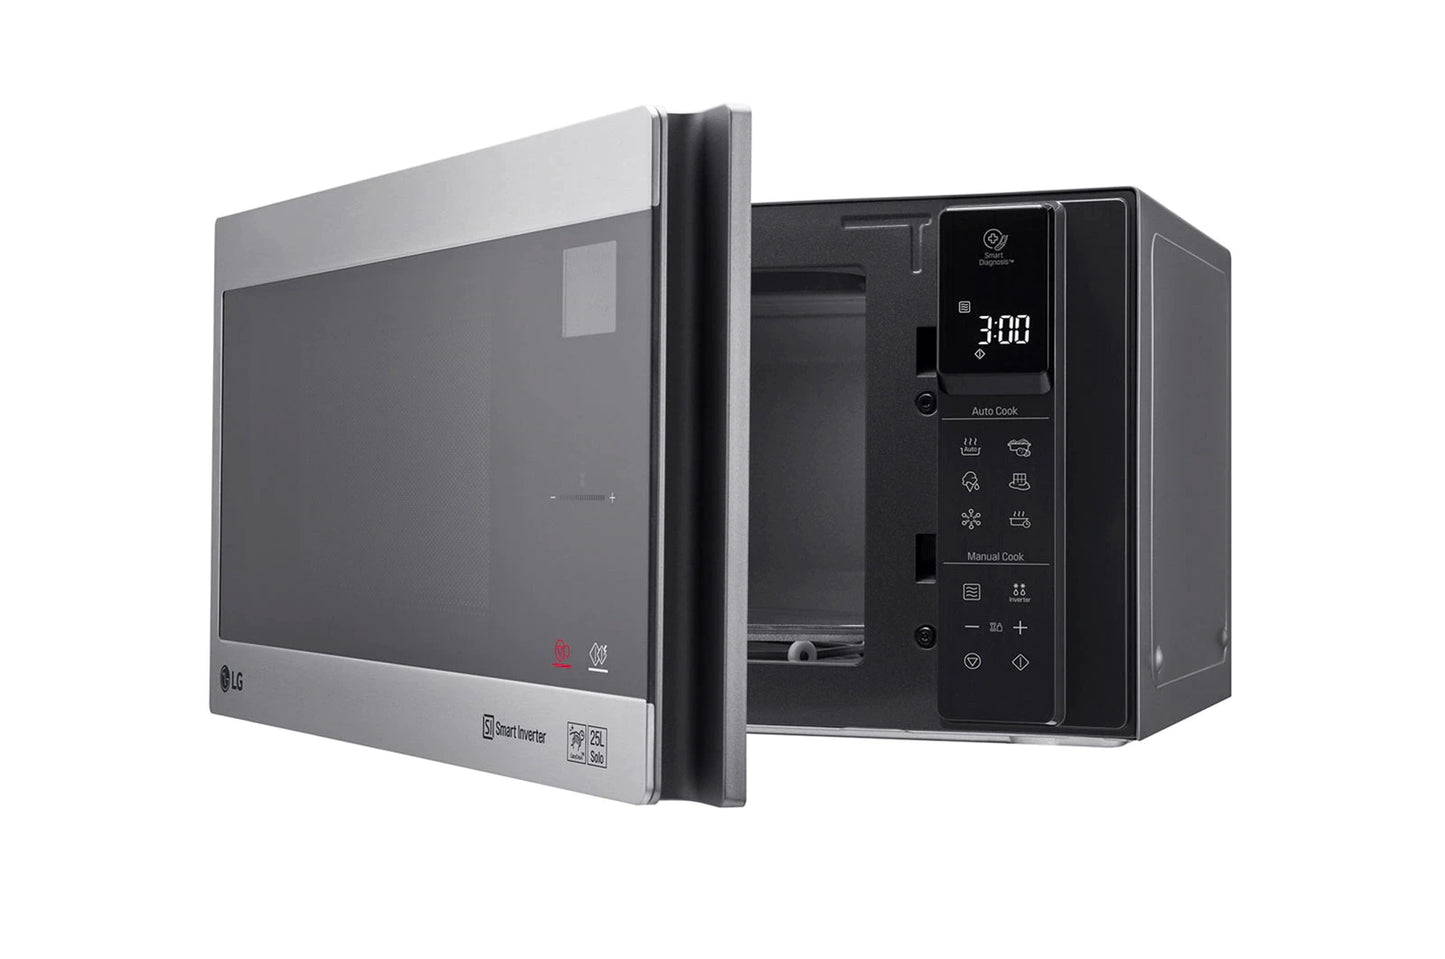 LG MS2595CIS 1000W 25L Smart Inverter Microwave Oven MWO 2595